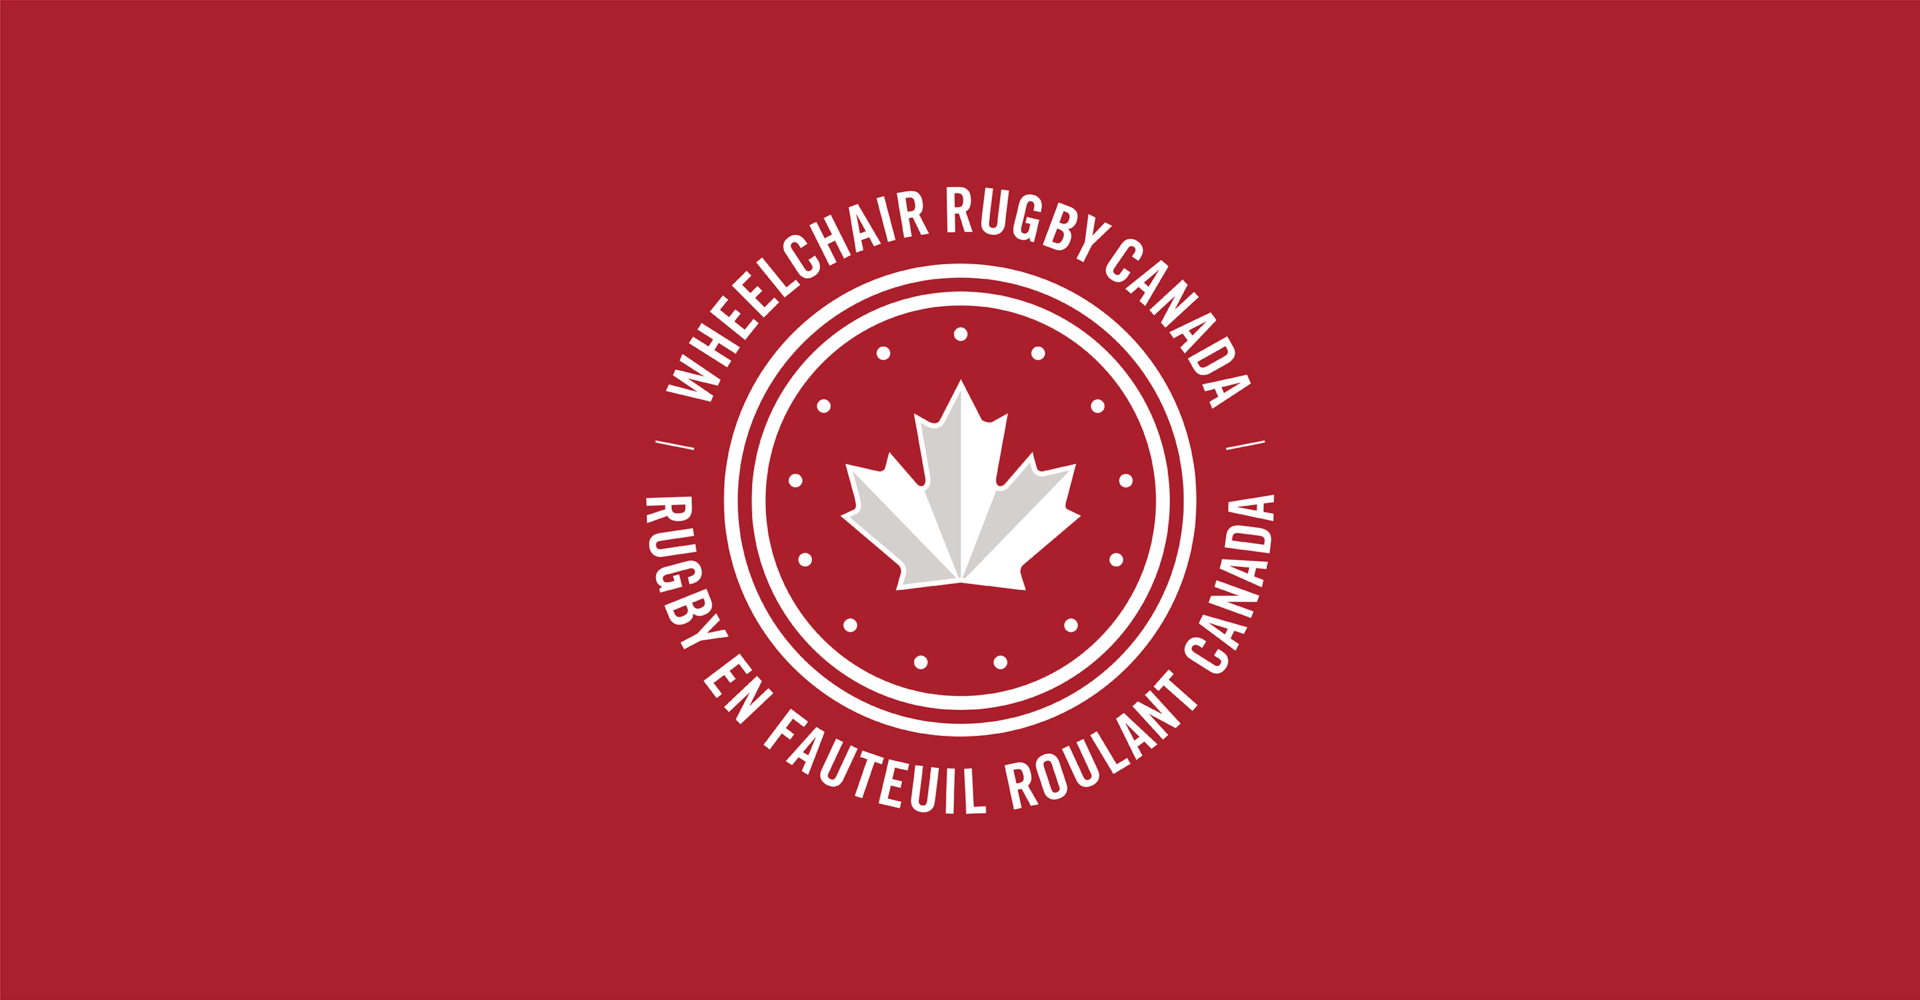 Introduction to Competition Wheelchair Rugby Coaching Workshop